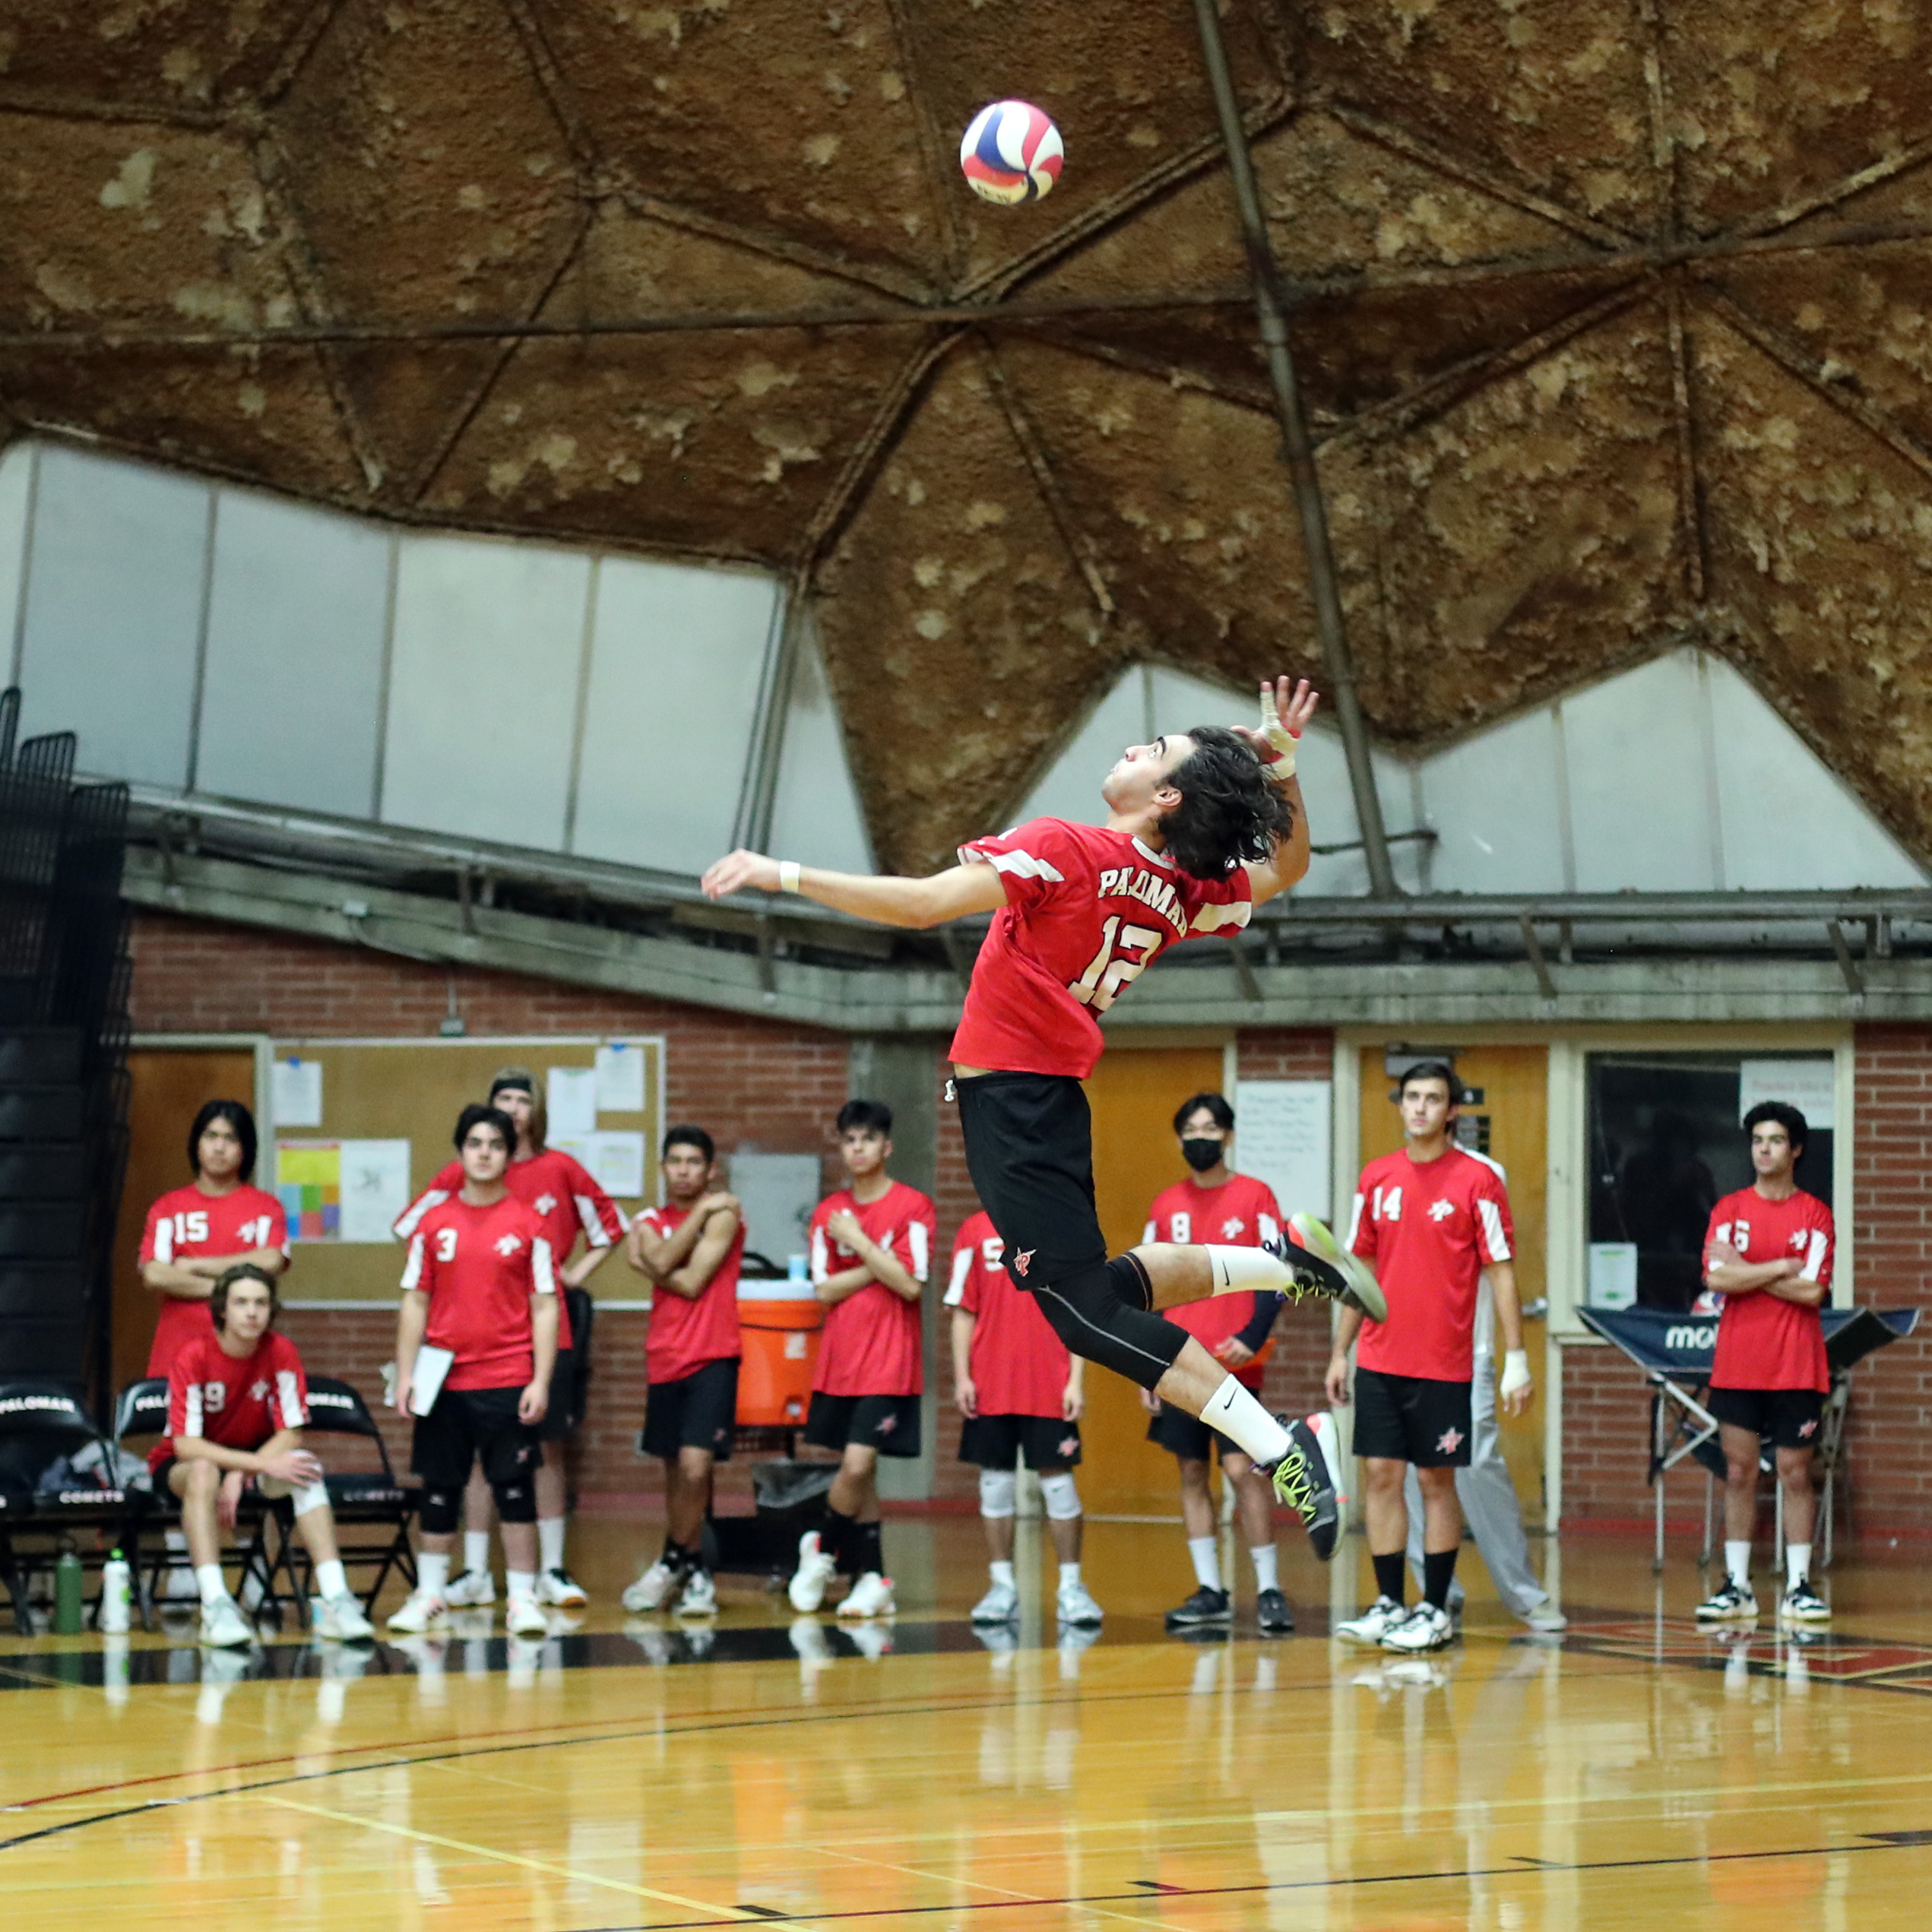 A male, Palomar volleyball player leaps in the air and prepares to spike a volleyball. His teammates in the background watches him.